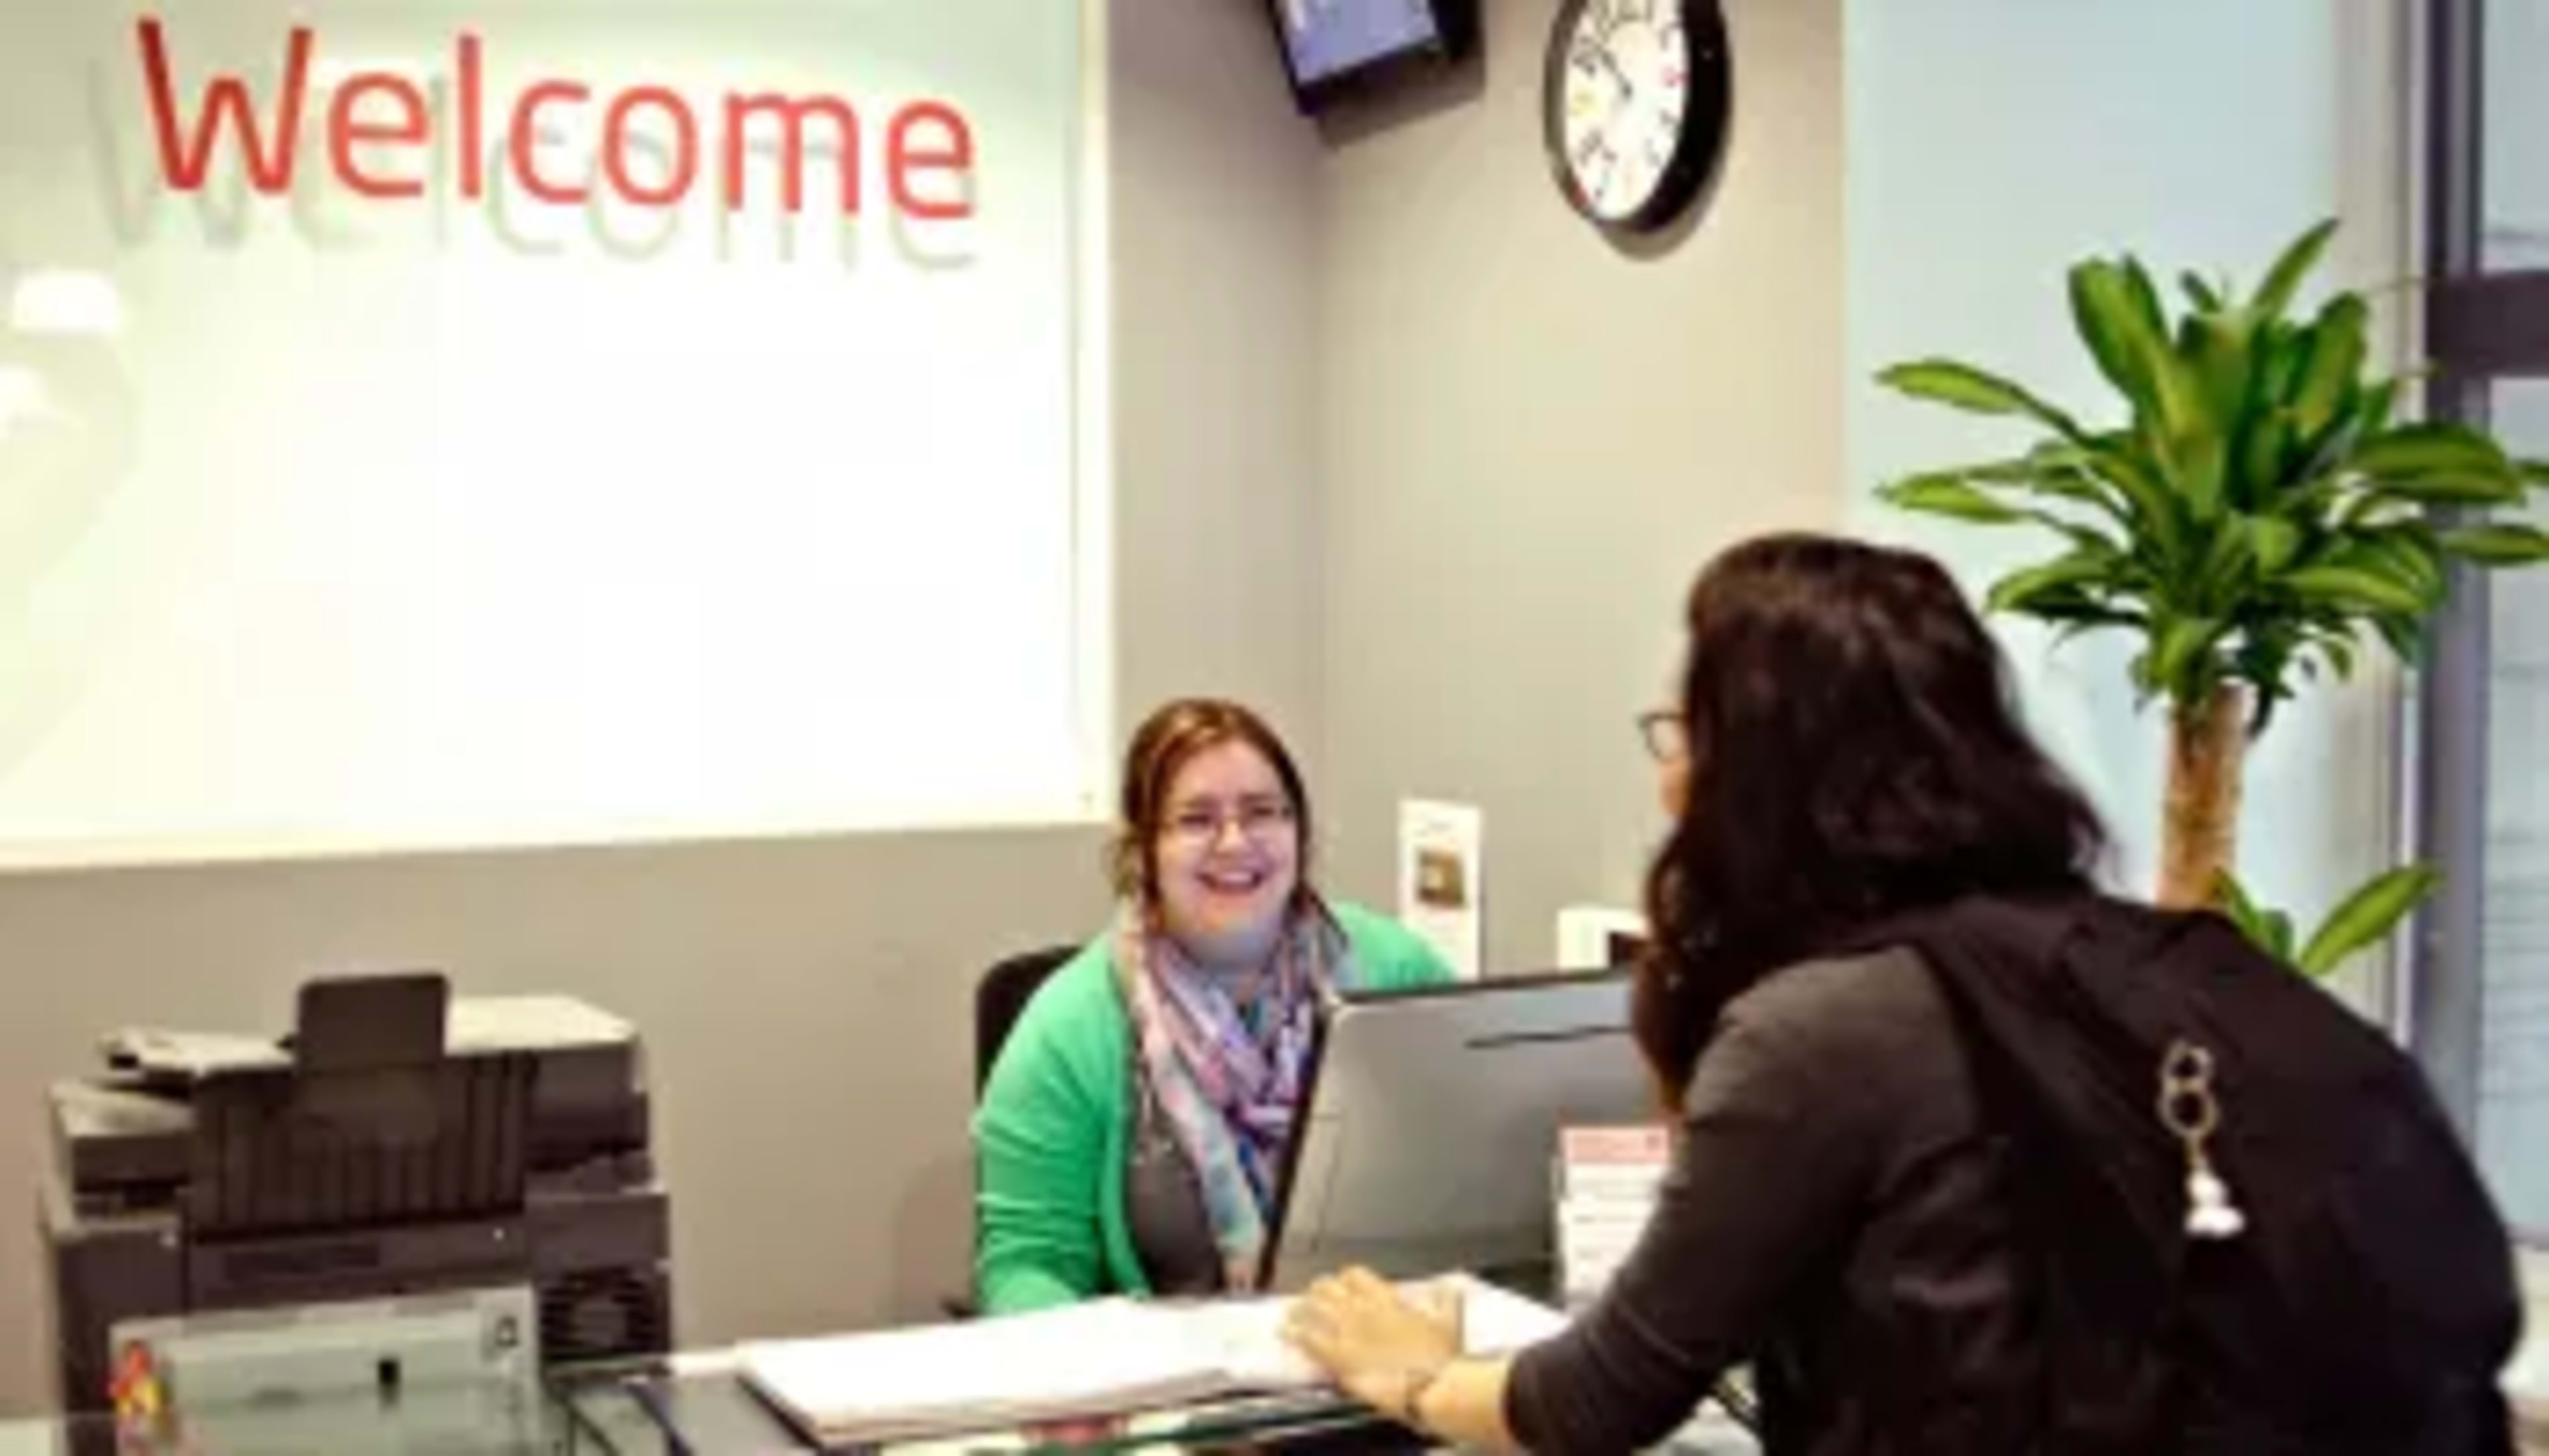 Student at welcome desk speaking with staff member